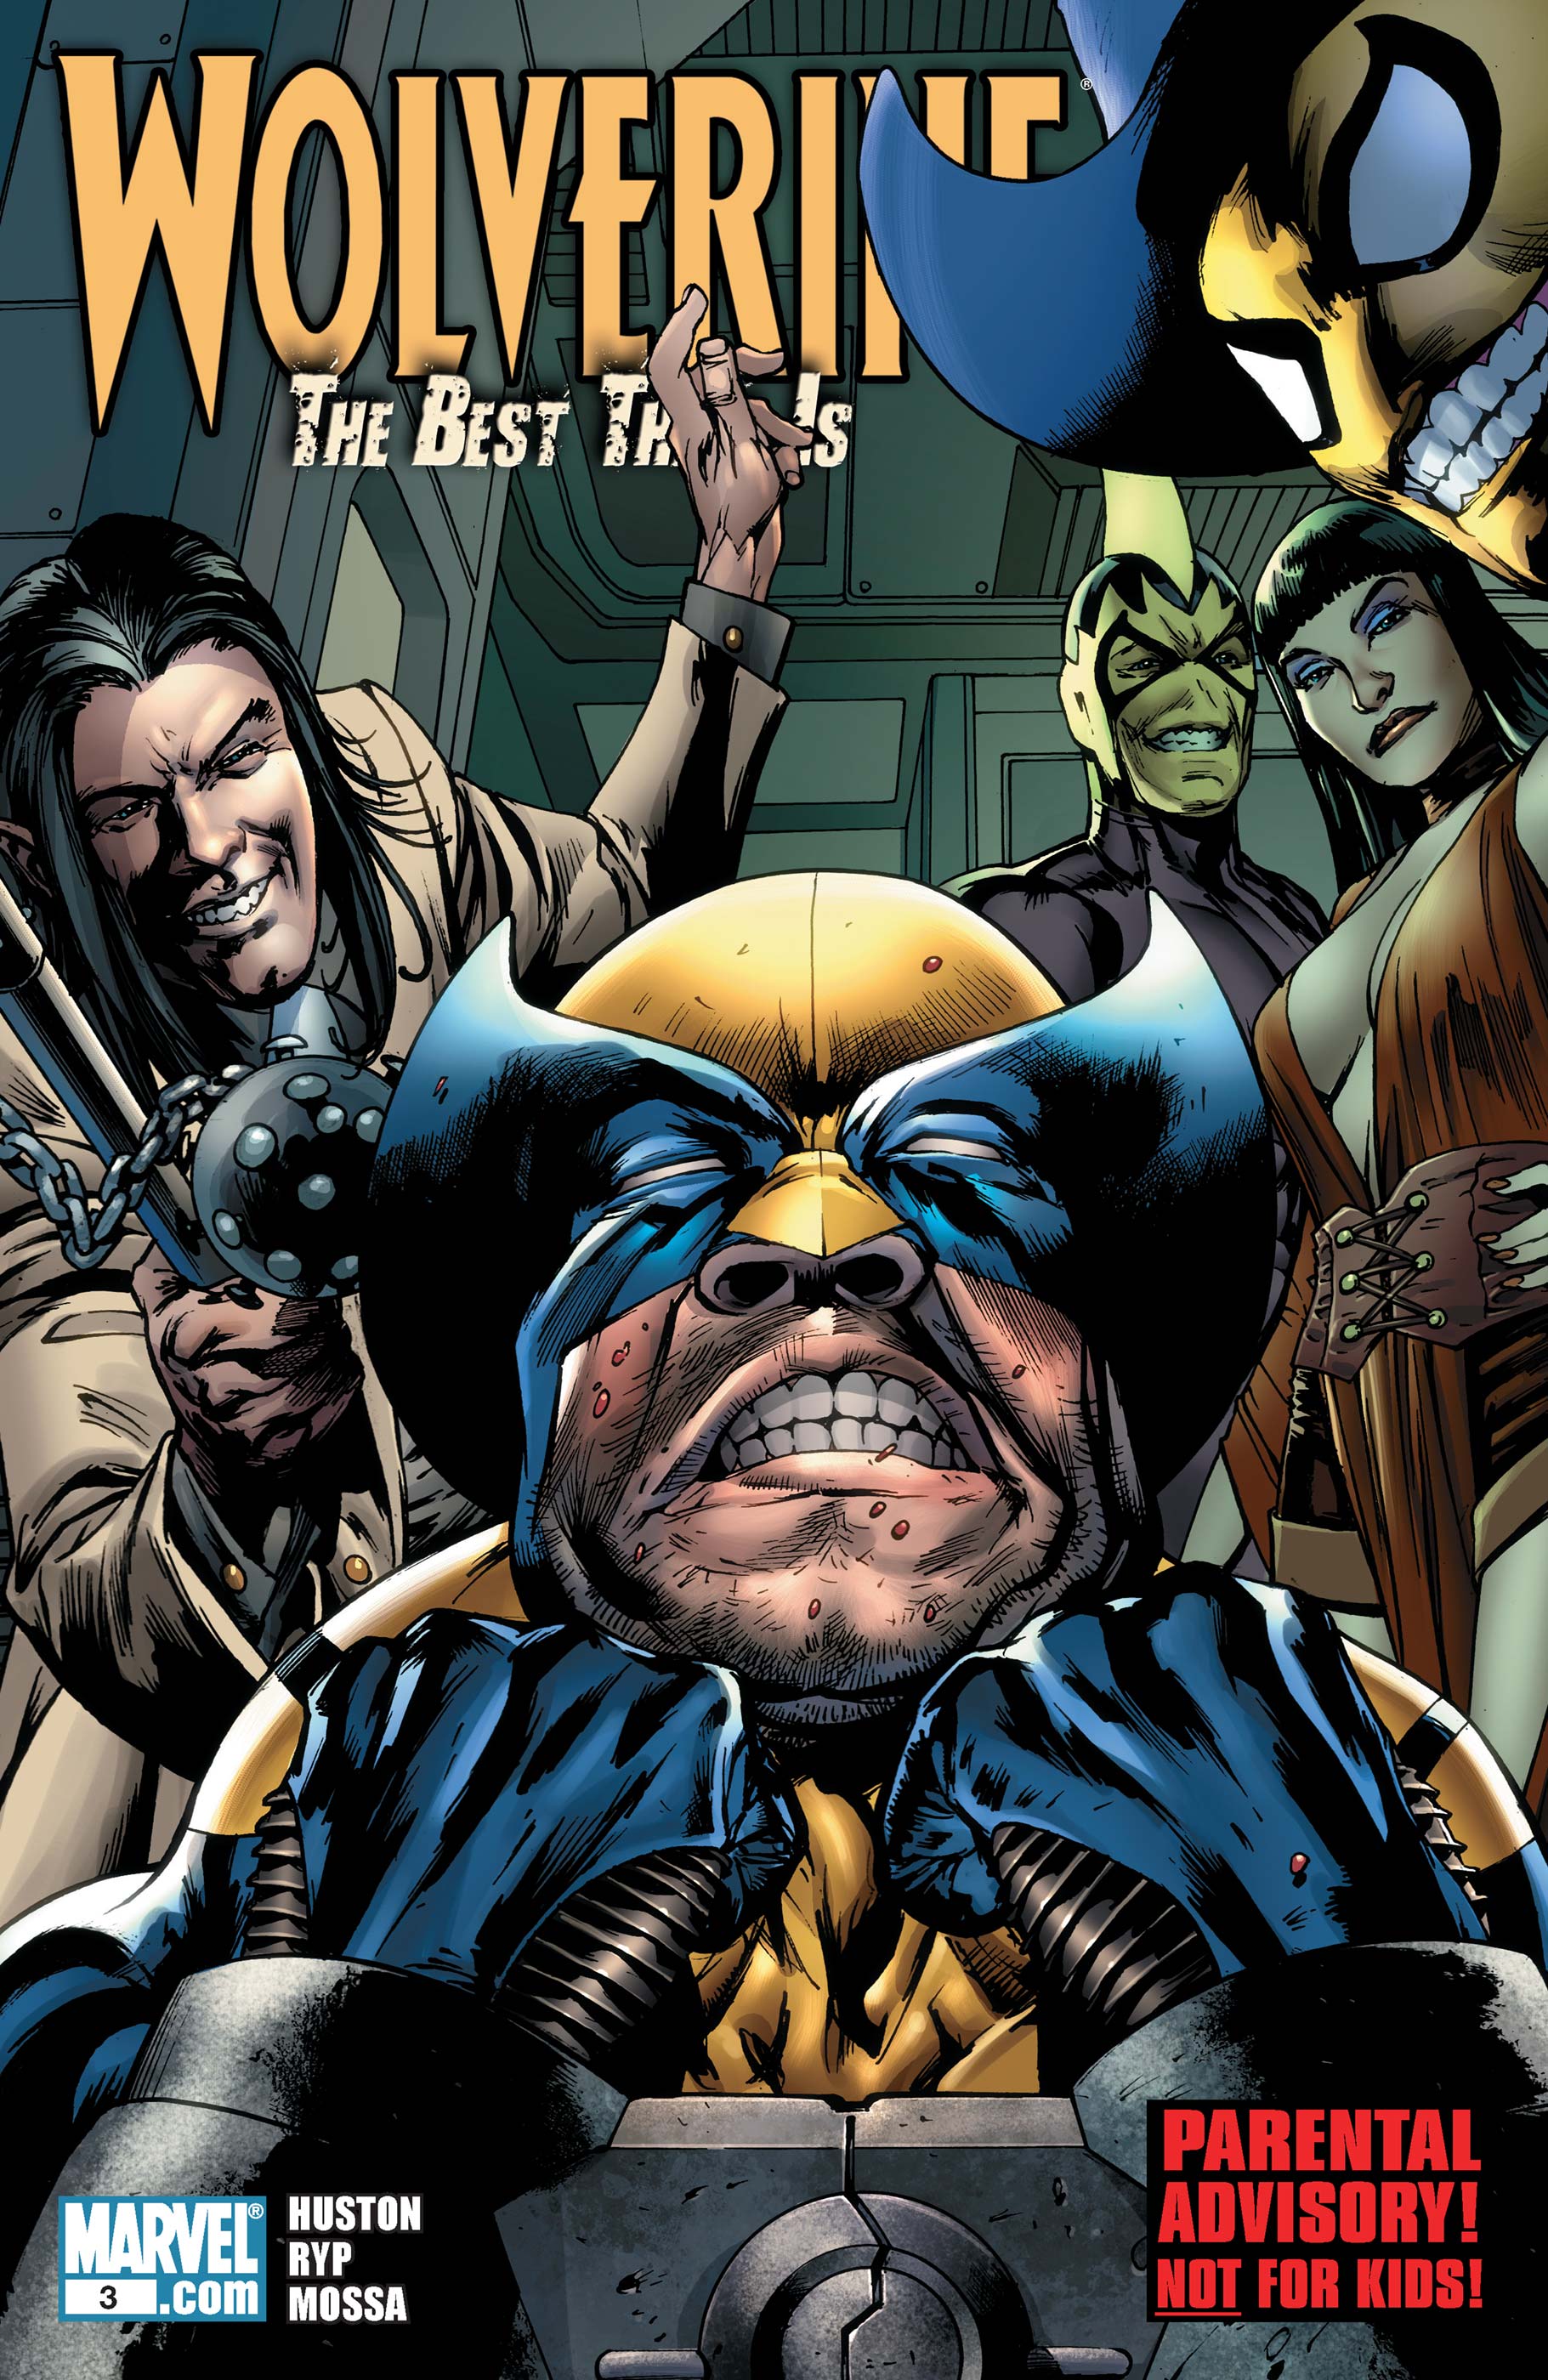 Wolverine: The Best There Is (2010) #3